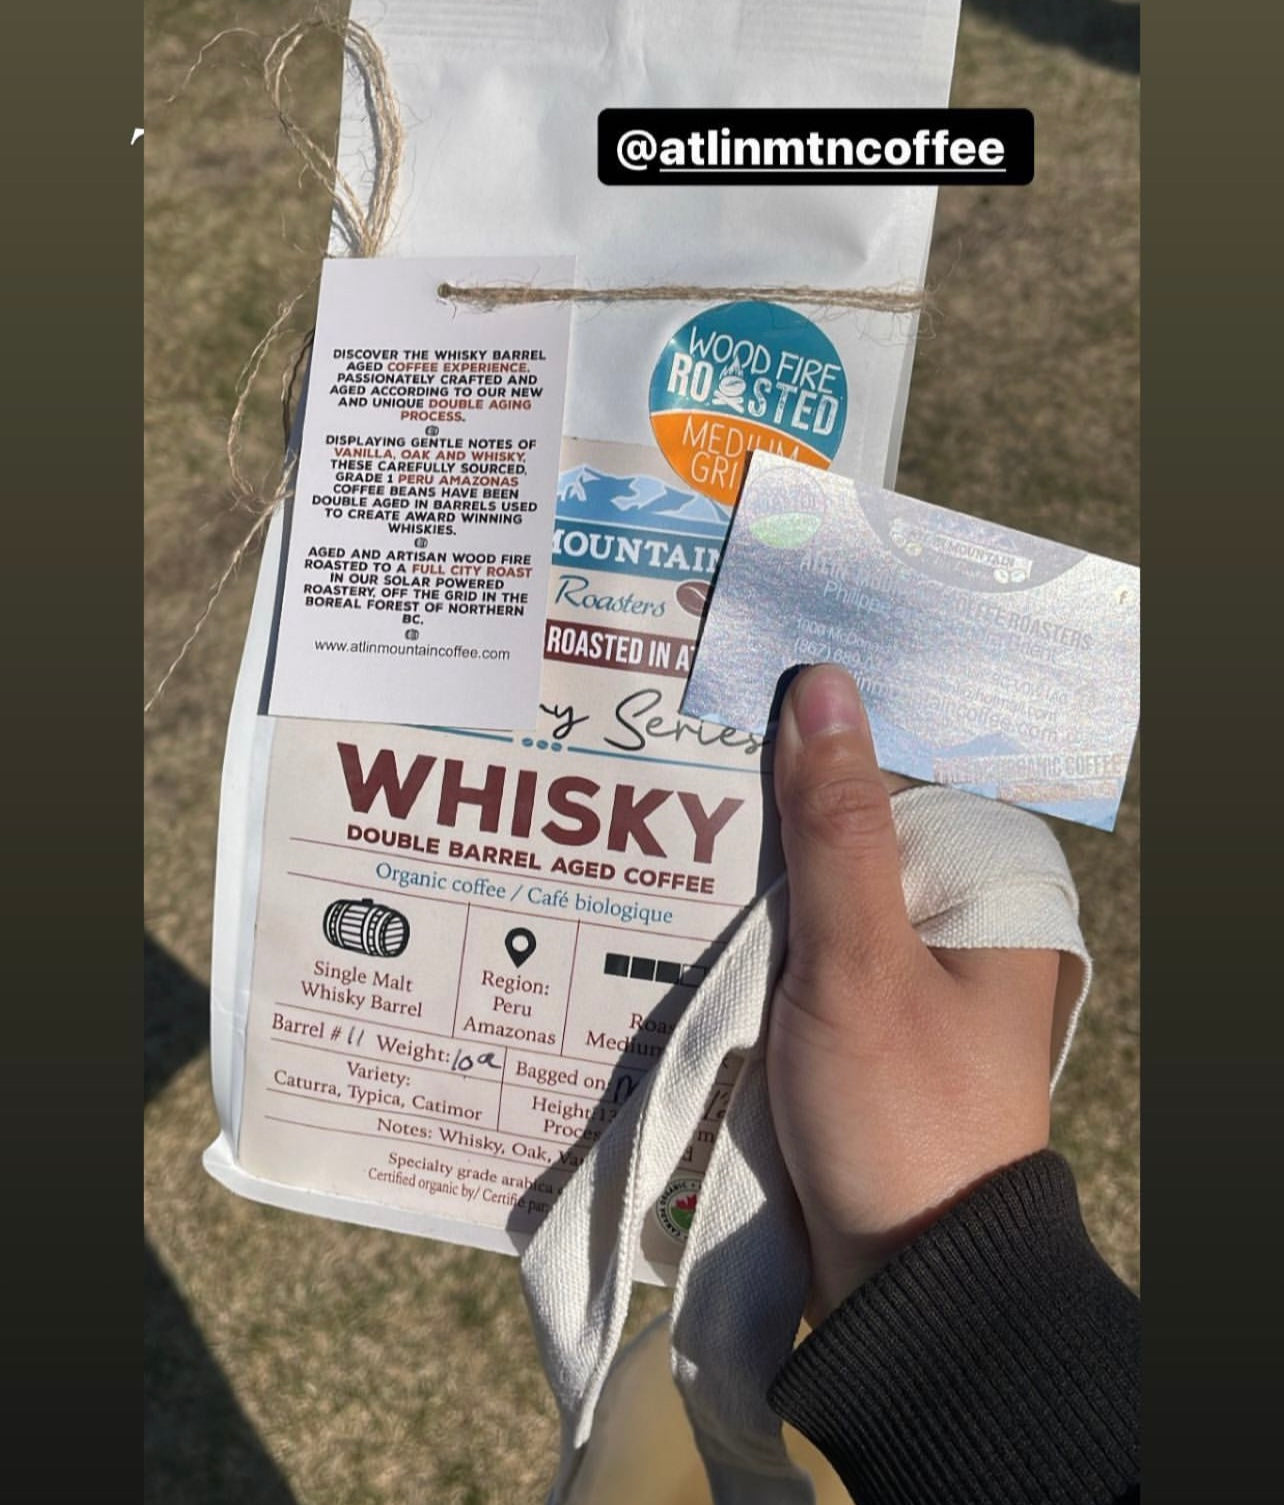 Whisky barrel aged coffee in a bag